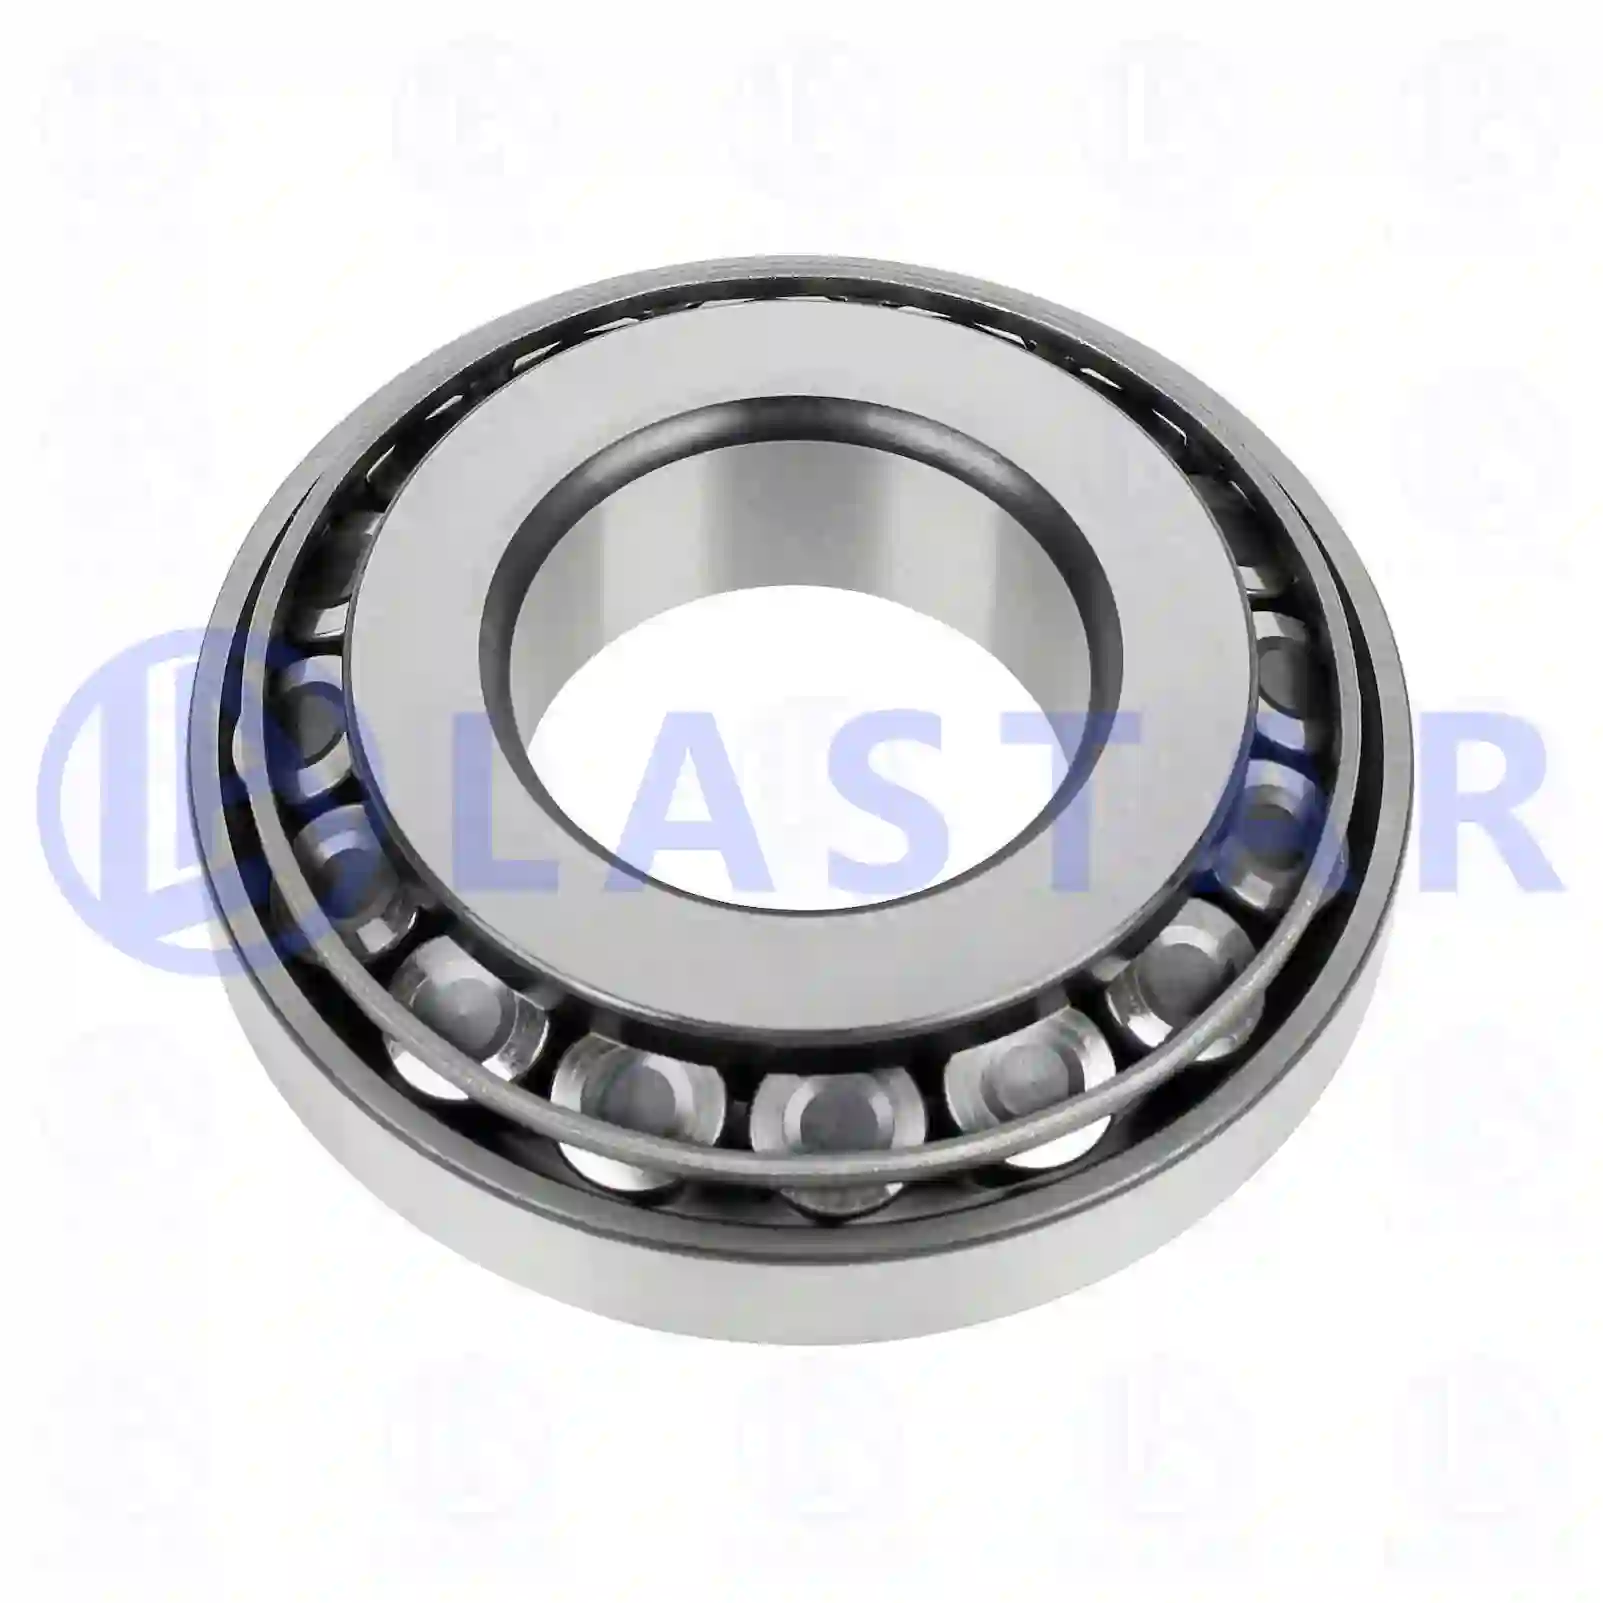 Bearings Tapered roller bearing, la no: 77724891 ,  oem no:384810, 06324905900, 06324990022, 06324990088, 64934200028, 64934200032, 81934200097, 87523500900, 0019800502, 0029814505, 0039810605, 0139816205, 0189819205, 9429810405, 129289, 2V5501319A Lastar Spare Part | Truck Spare Parts, Auotomotive Spare Parts